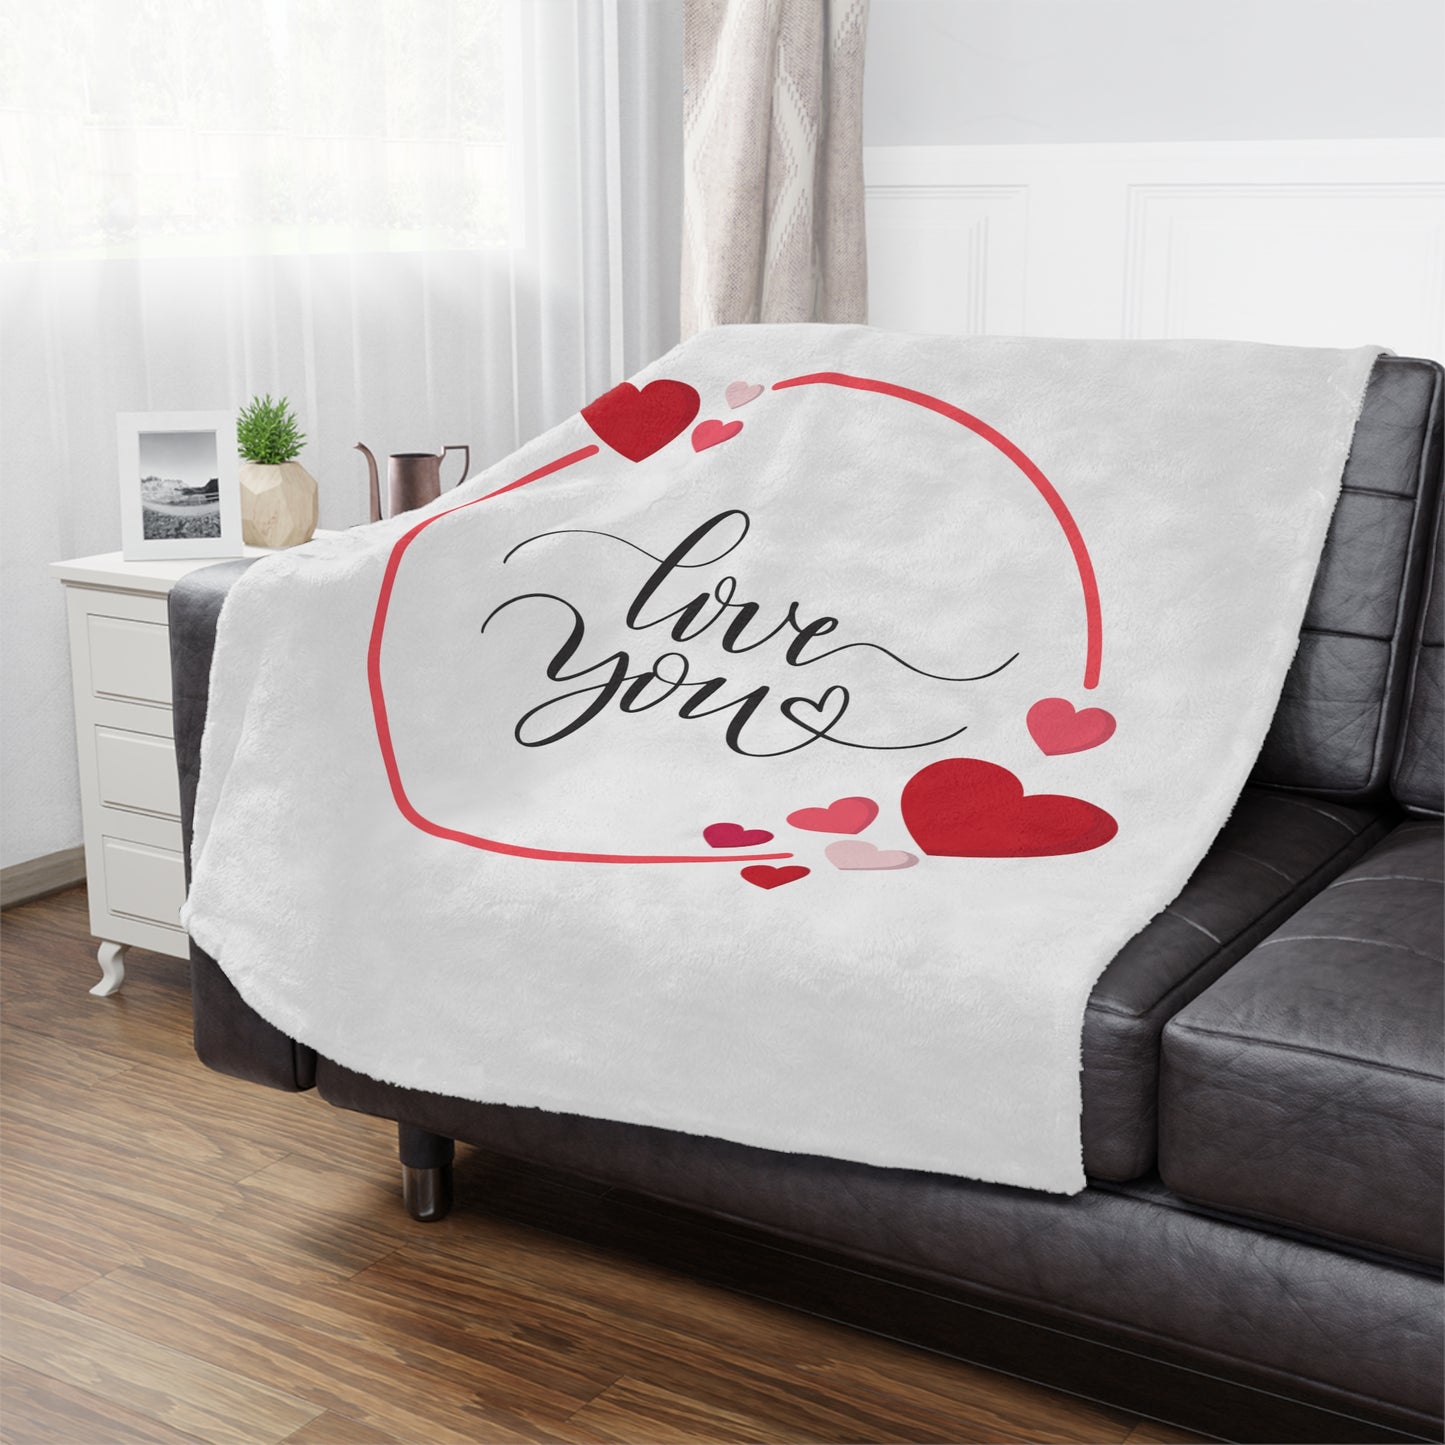 Love You with Flying Hearts Printed Velveteen Minky Blanket for Valentine